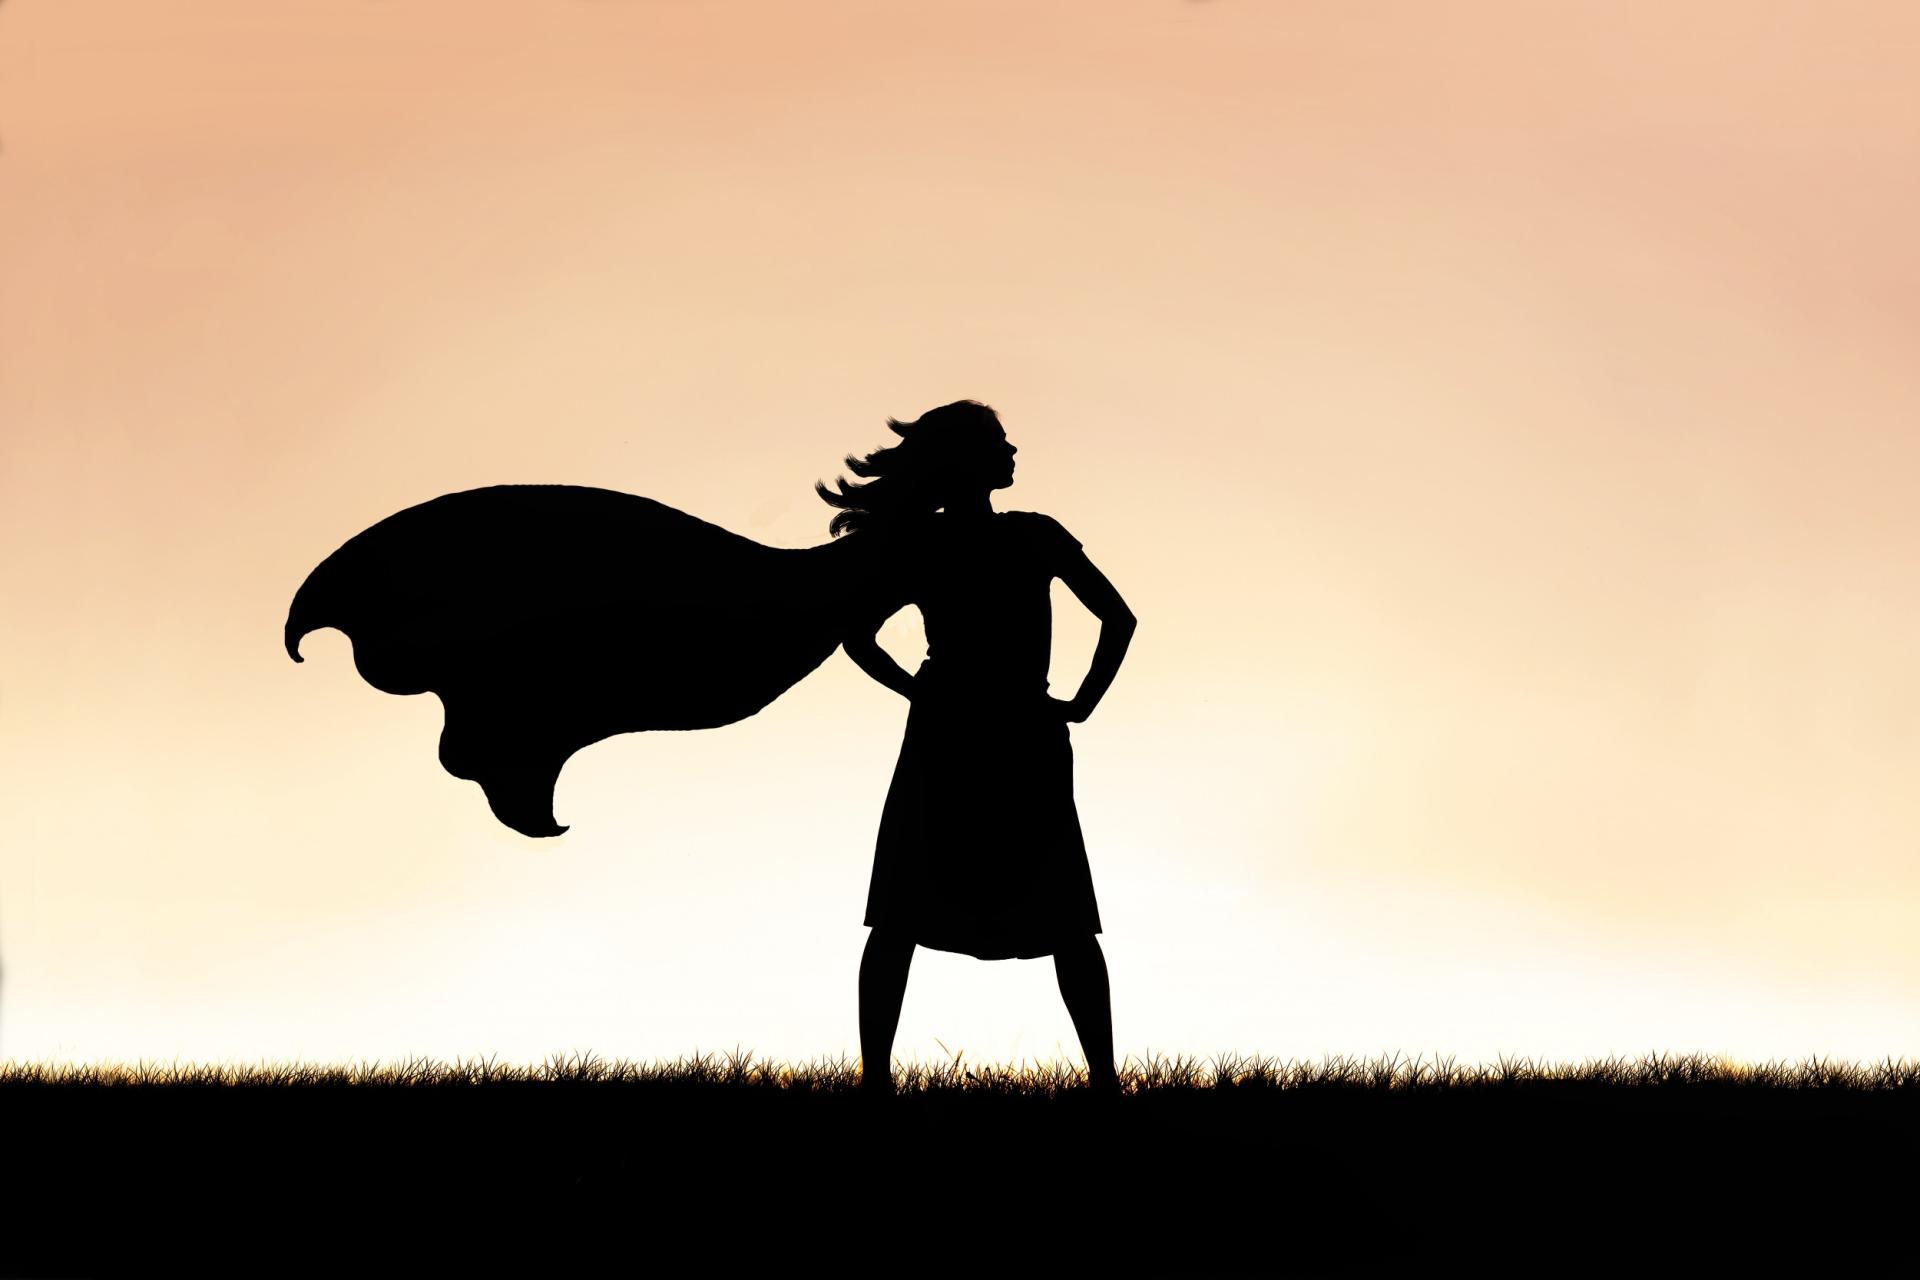 a woman silhouette with cape showing that she belongs to power people